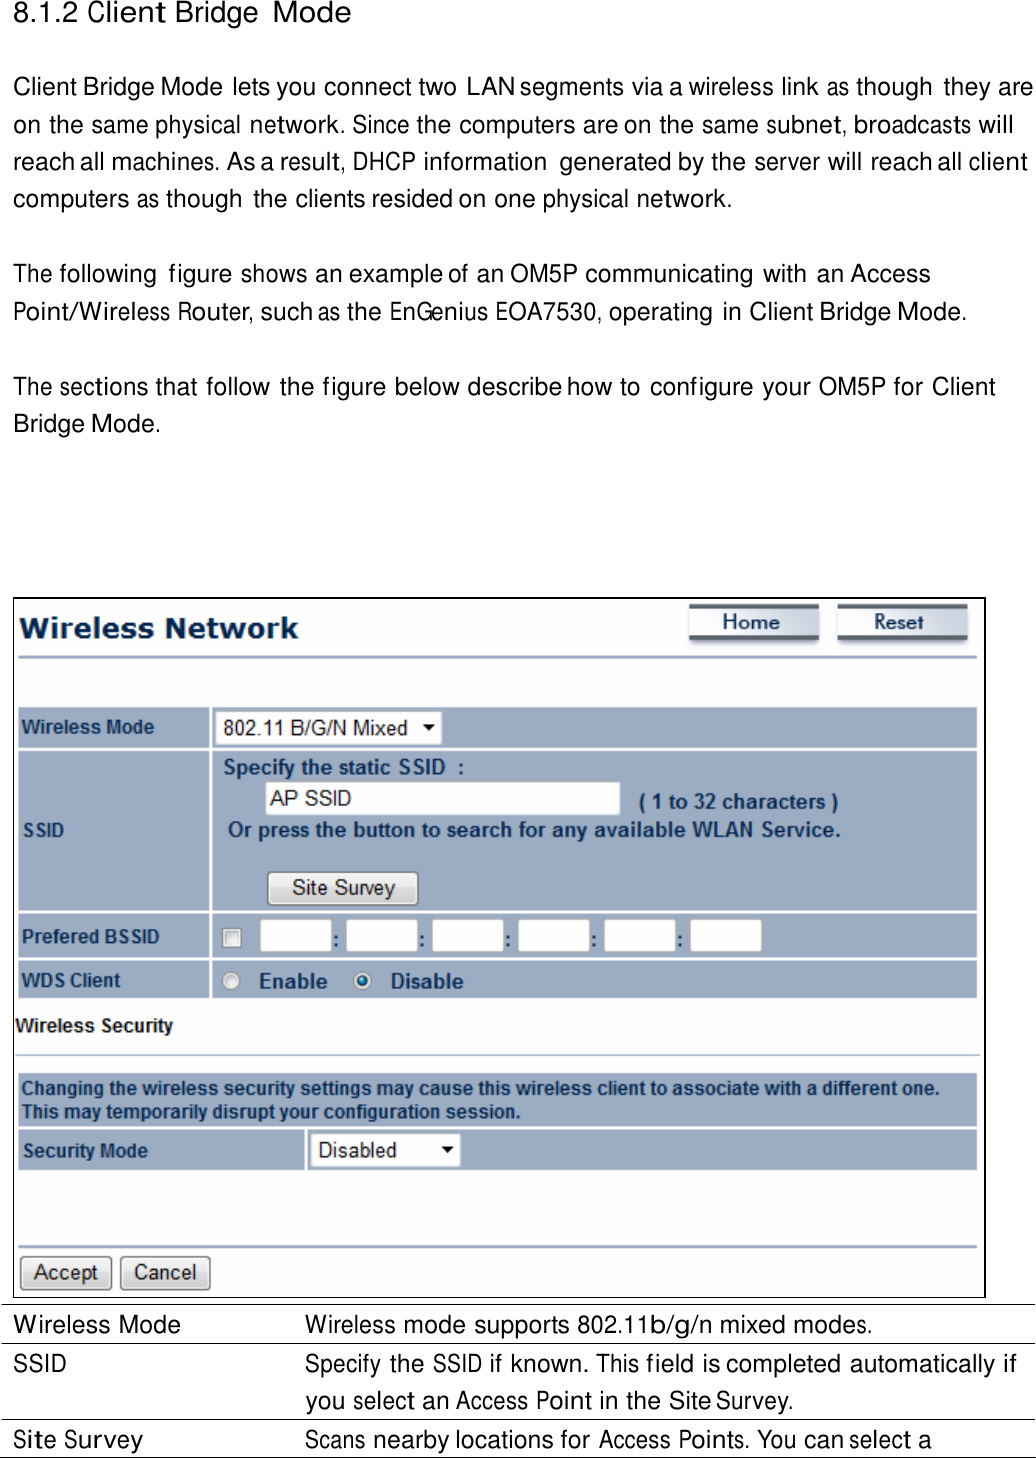  8.1.2 Client Bridge Mode   Client Bridge Mode lets you connect two LAN segments via a wireless link as though they are on the same physical network. Since the computers are on the same subnet, broadcasts will reach all machines. As a result, DHCP information  generated by the server will reach all client computers as though the clients resided on one physical network.   The following  figure shows an example of an OM5P communicating with an Access Point/Wireless Router, such as the EnGenius EOA7530, operating in Client Bridge Mode.   The sections that follow the figure below describe how to configure your OM5P for Client Bridge Mode.                                           Wireless Mode  Wireless mode supports 802.11b/g/n mixed modes. SSID Specify the SSID if known. This field is completed automatically if you select an Access Point in the Site Survey. Site Survey Scans nearby locations for Access Points. You can select a 